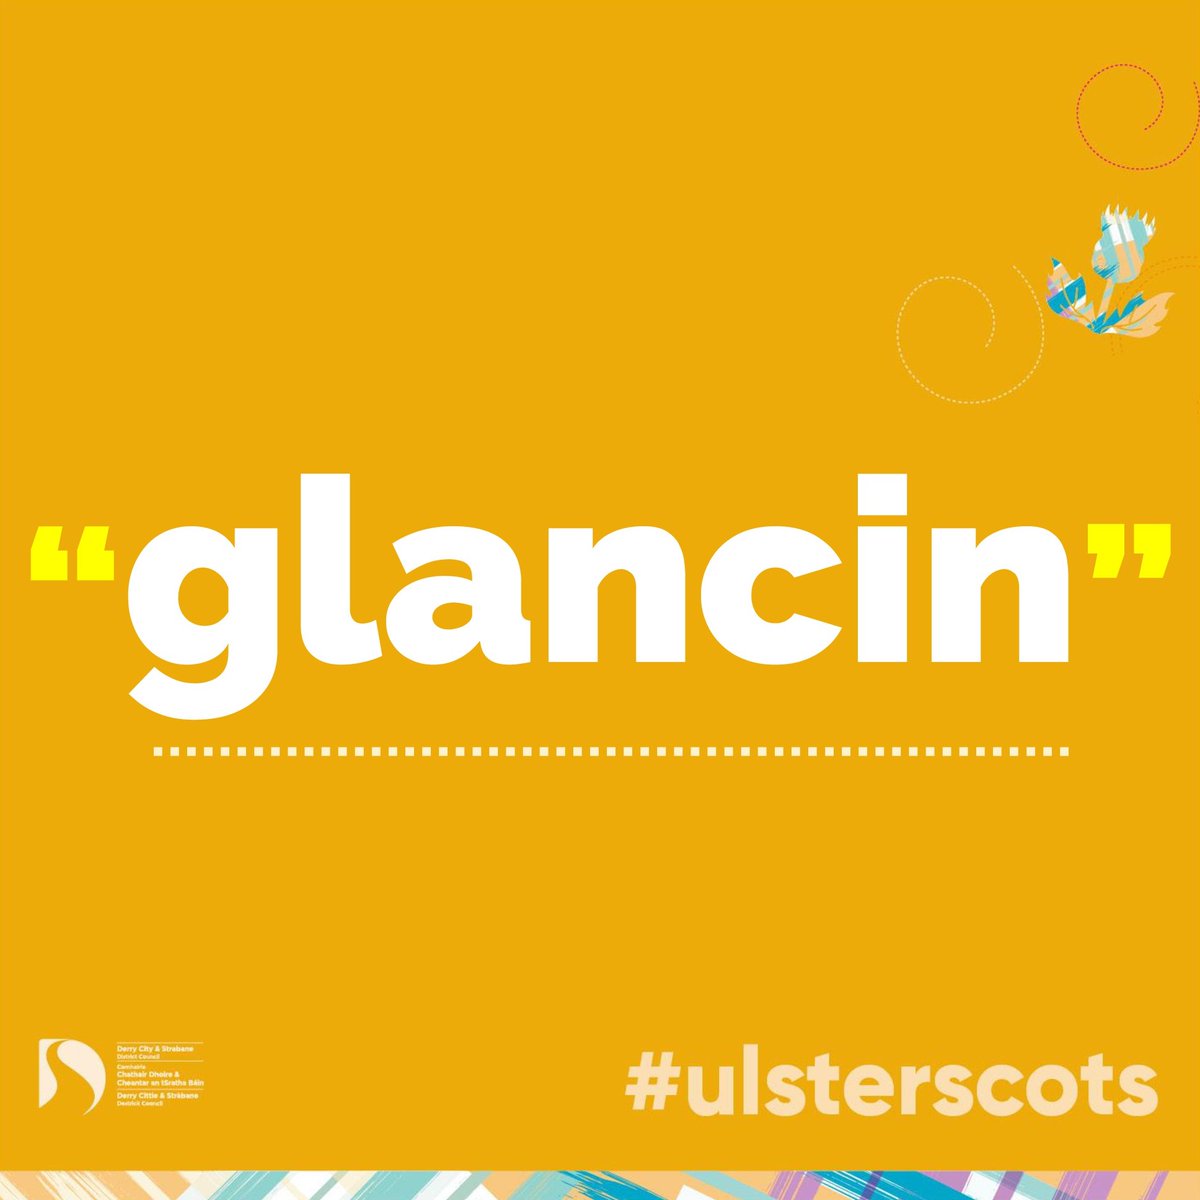 Glancin: sparkling, shining, gleaming. Possibly from the German etymon 'Glanz' meaning a shine or lustre #UlsterScots